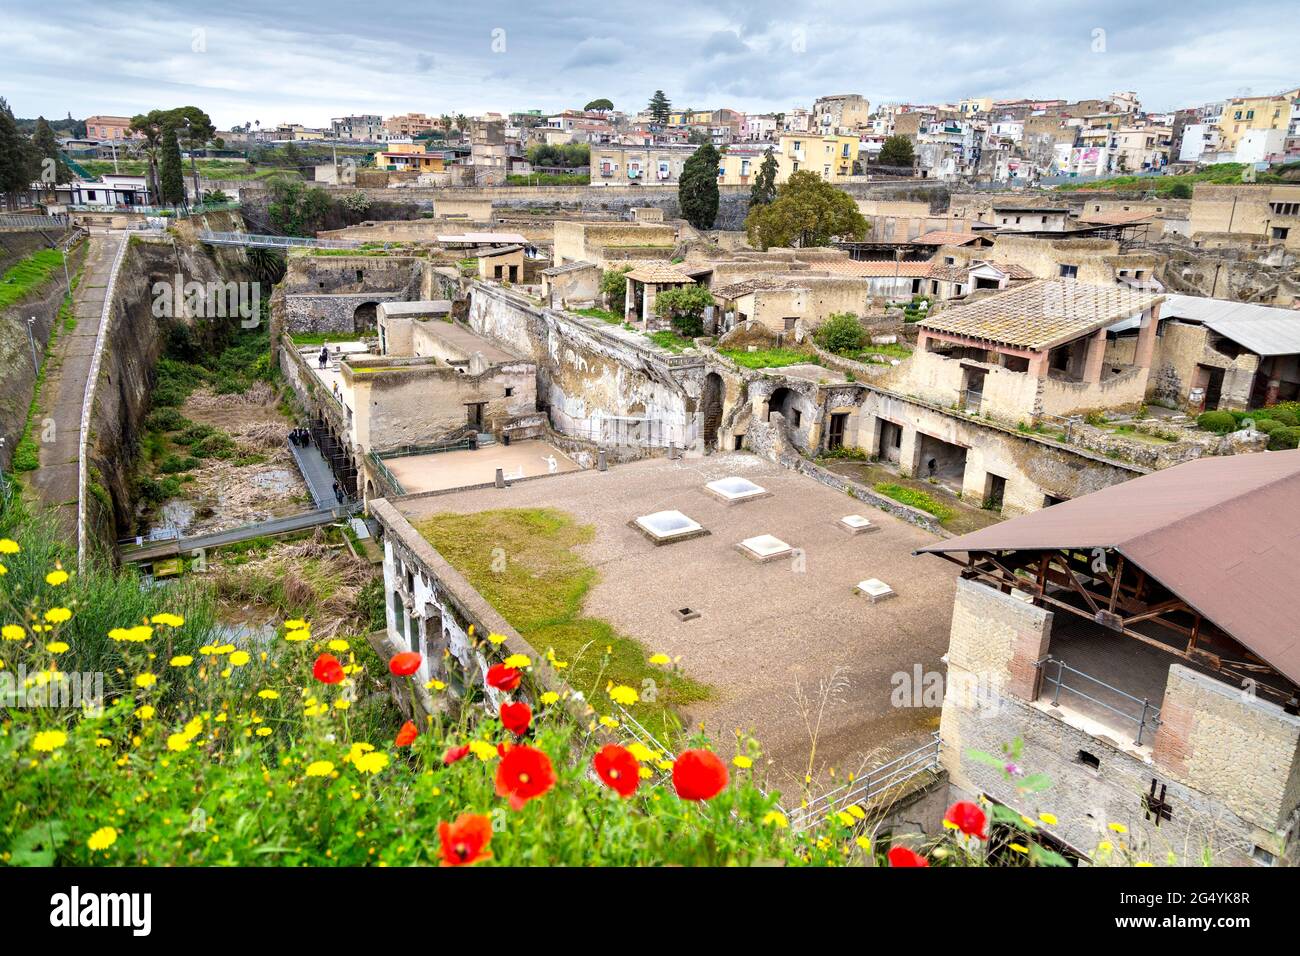 Archeological site of the Ancient City of Herculaneum, Campania, Italy Stock Photo